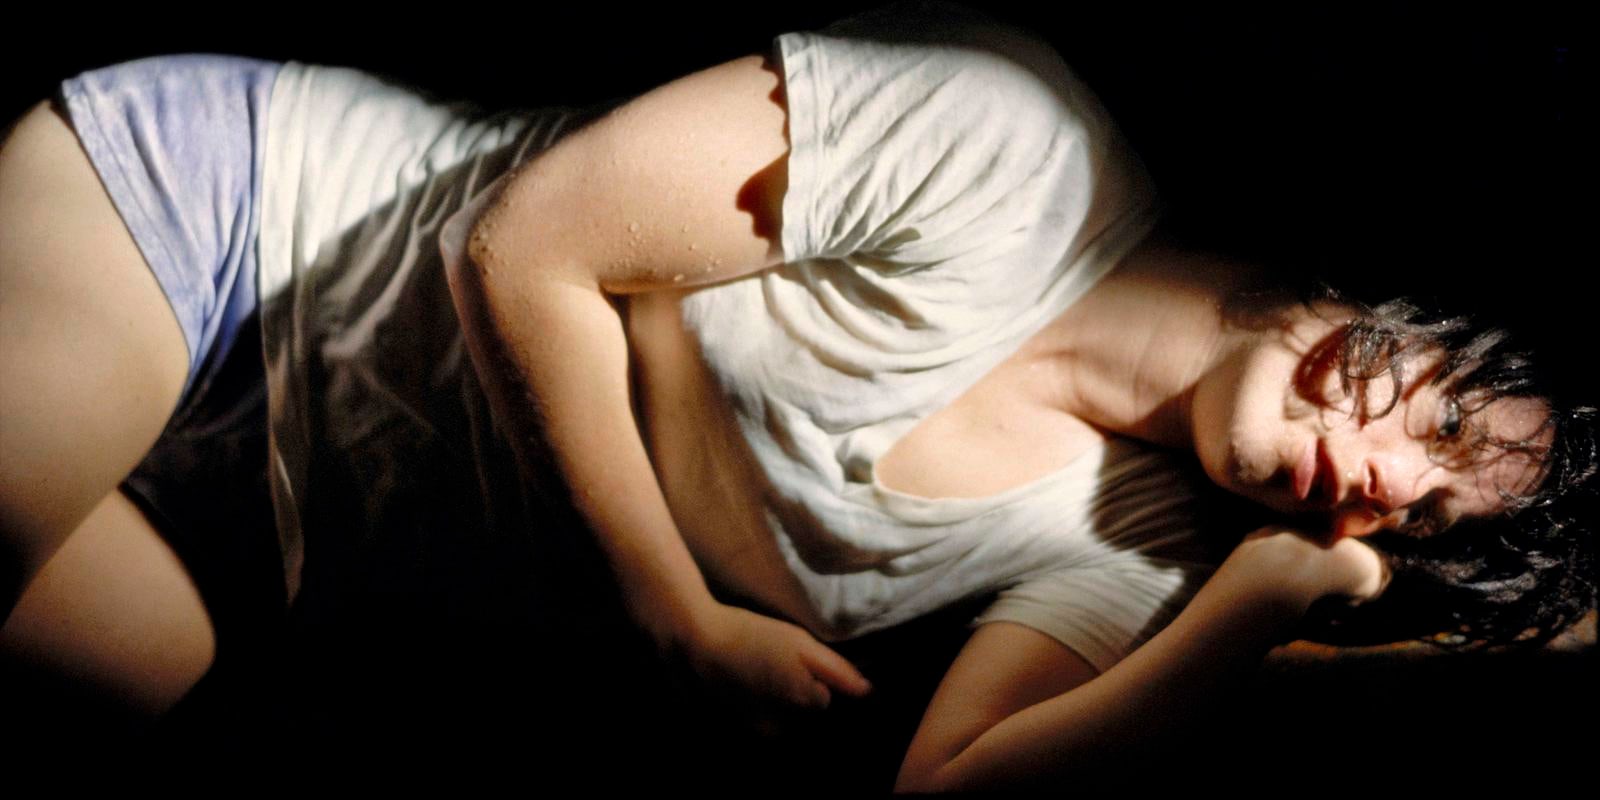 Cindy Sherman

Untitled #86

1981

chromogenic color print

24 x 48 inches (61 x 121.9 cm)

Edition of 10